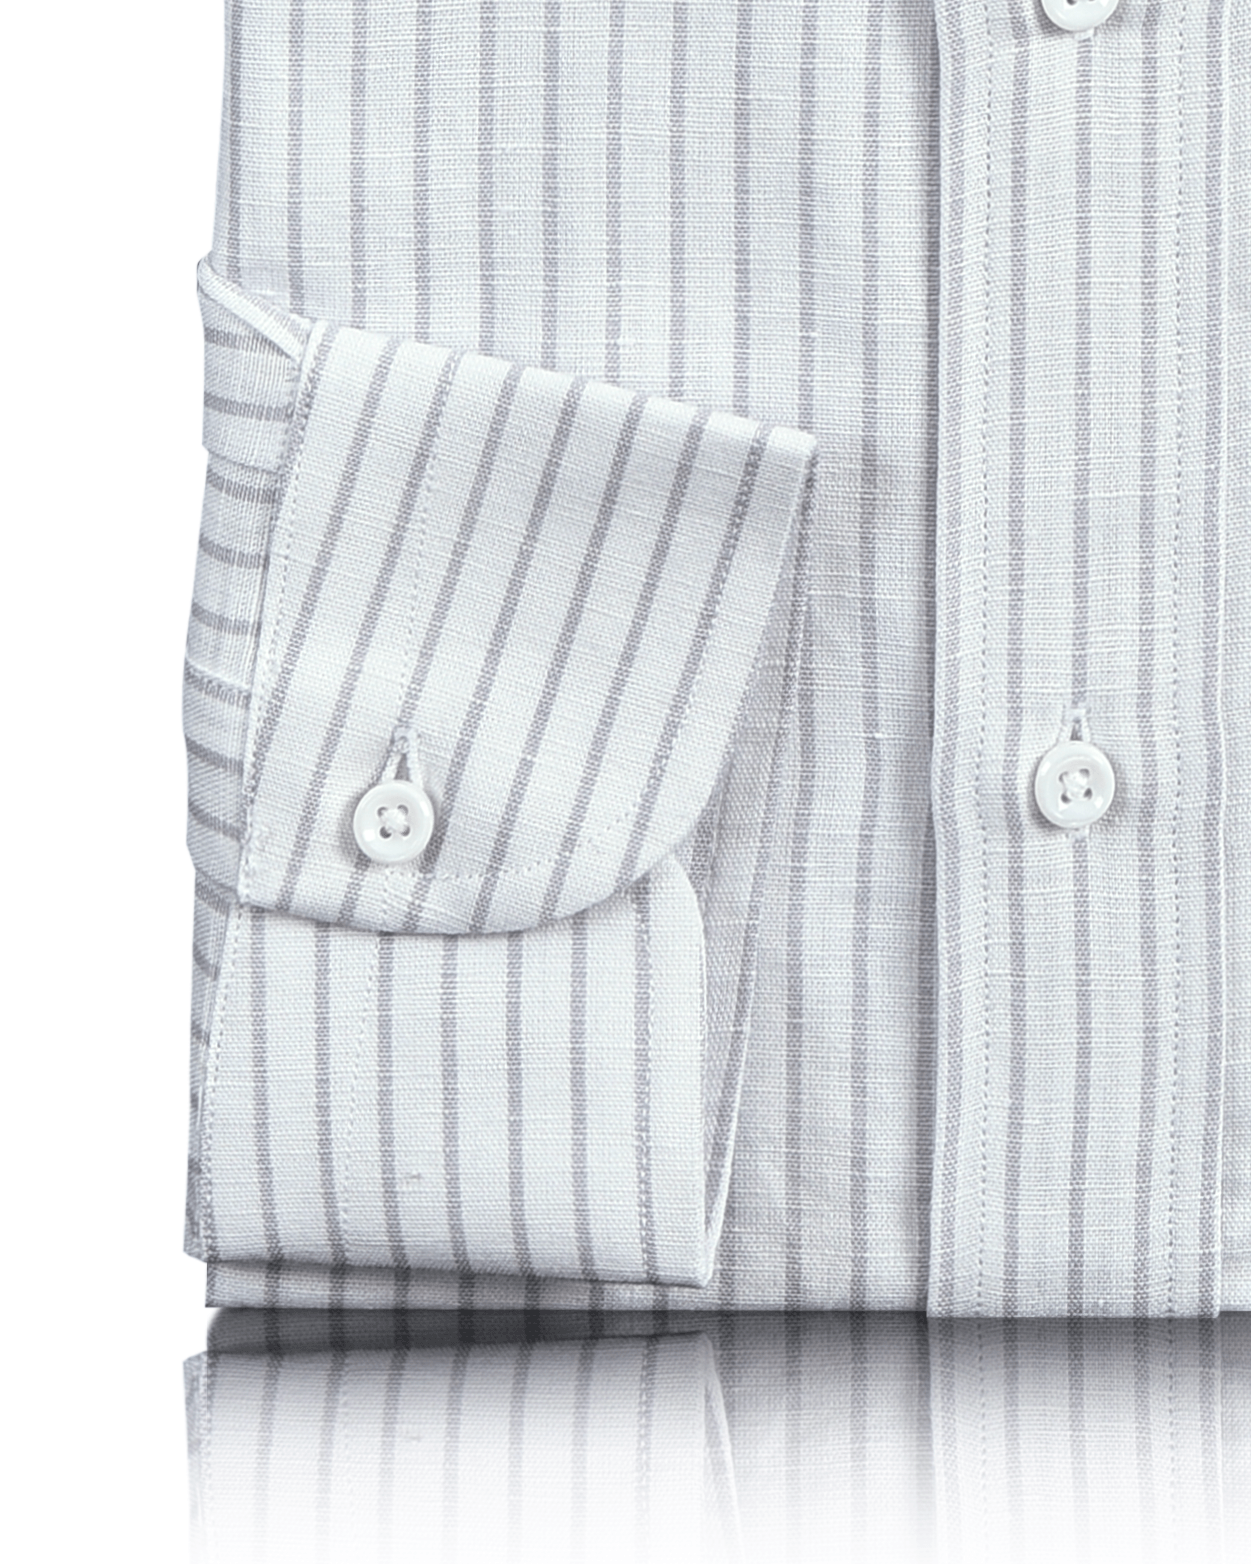 Cuff of the custom linen shirt for men in white with grey candy stripes by Luxire Clothing